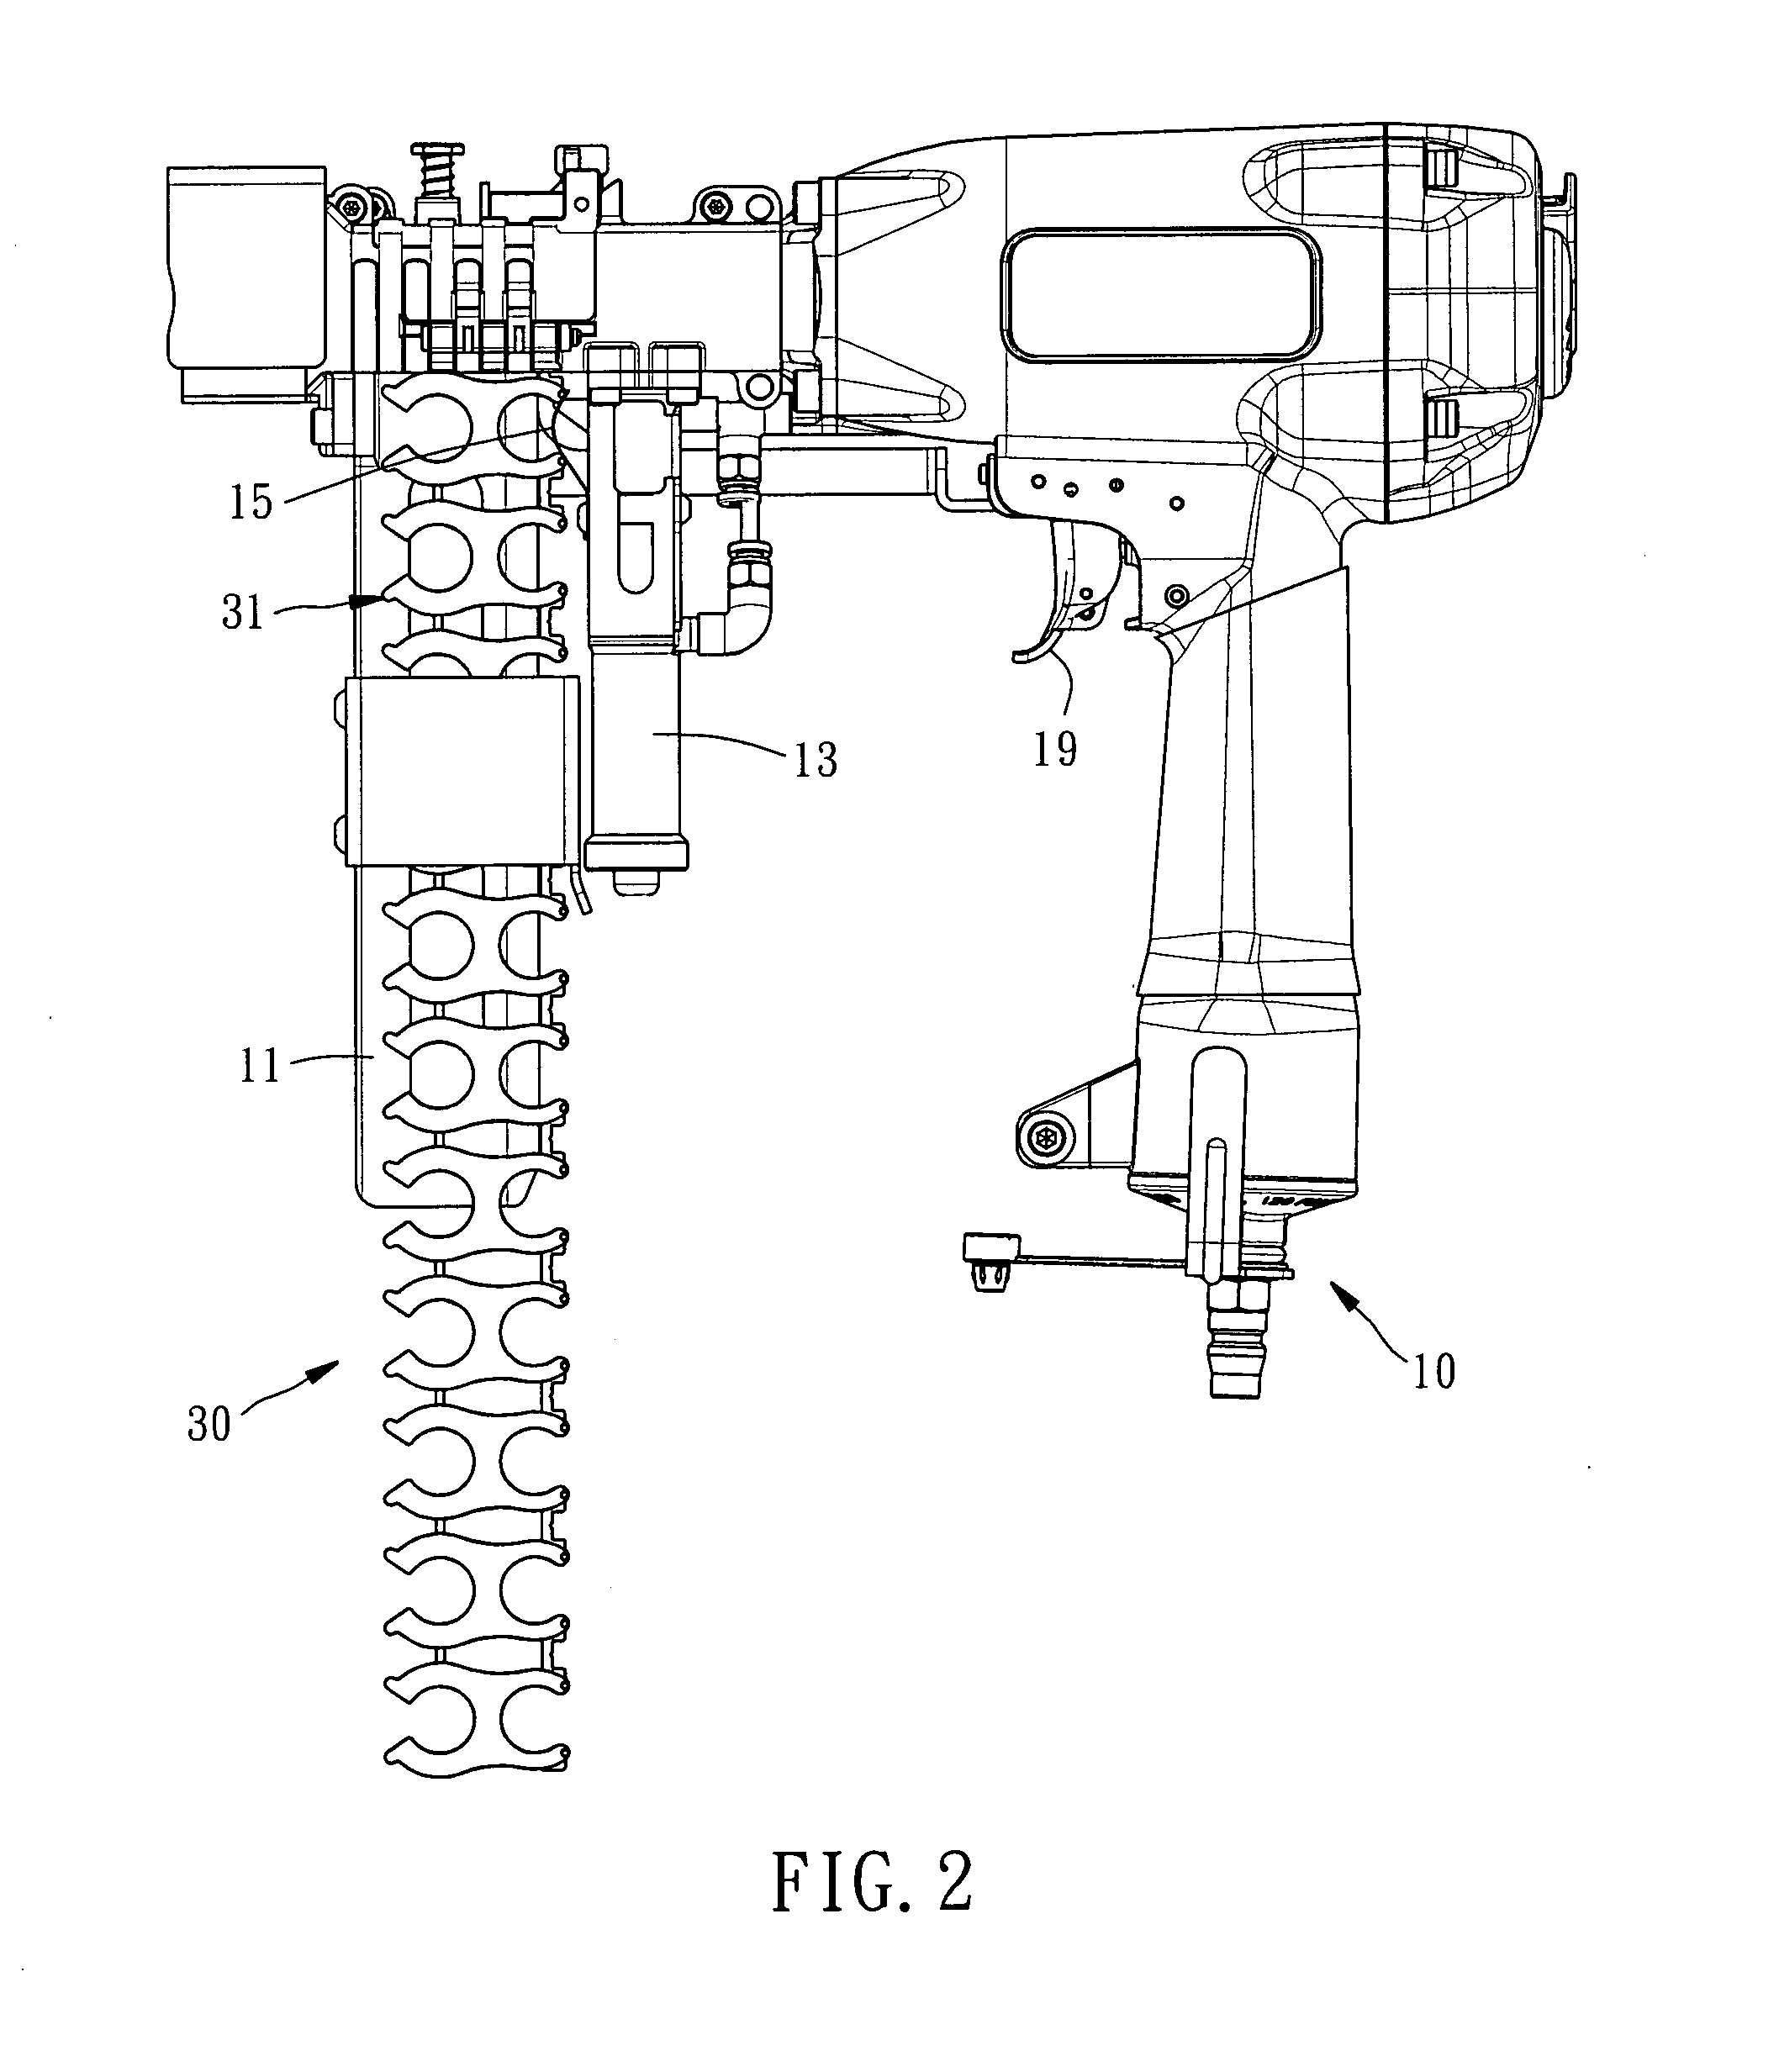 Method of continuously mounting clips to two abutted and crossed rods